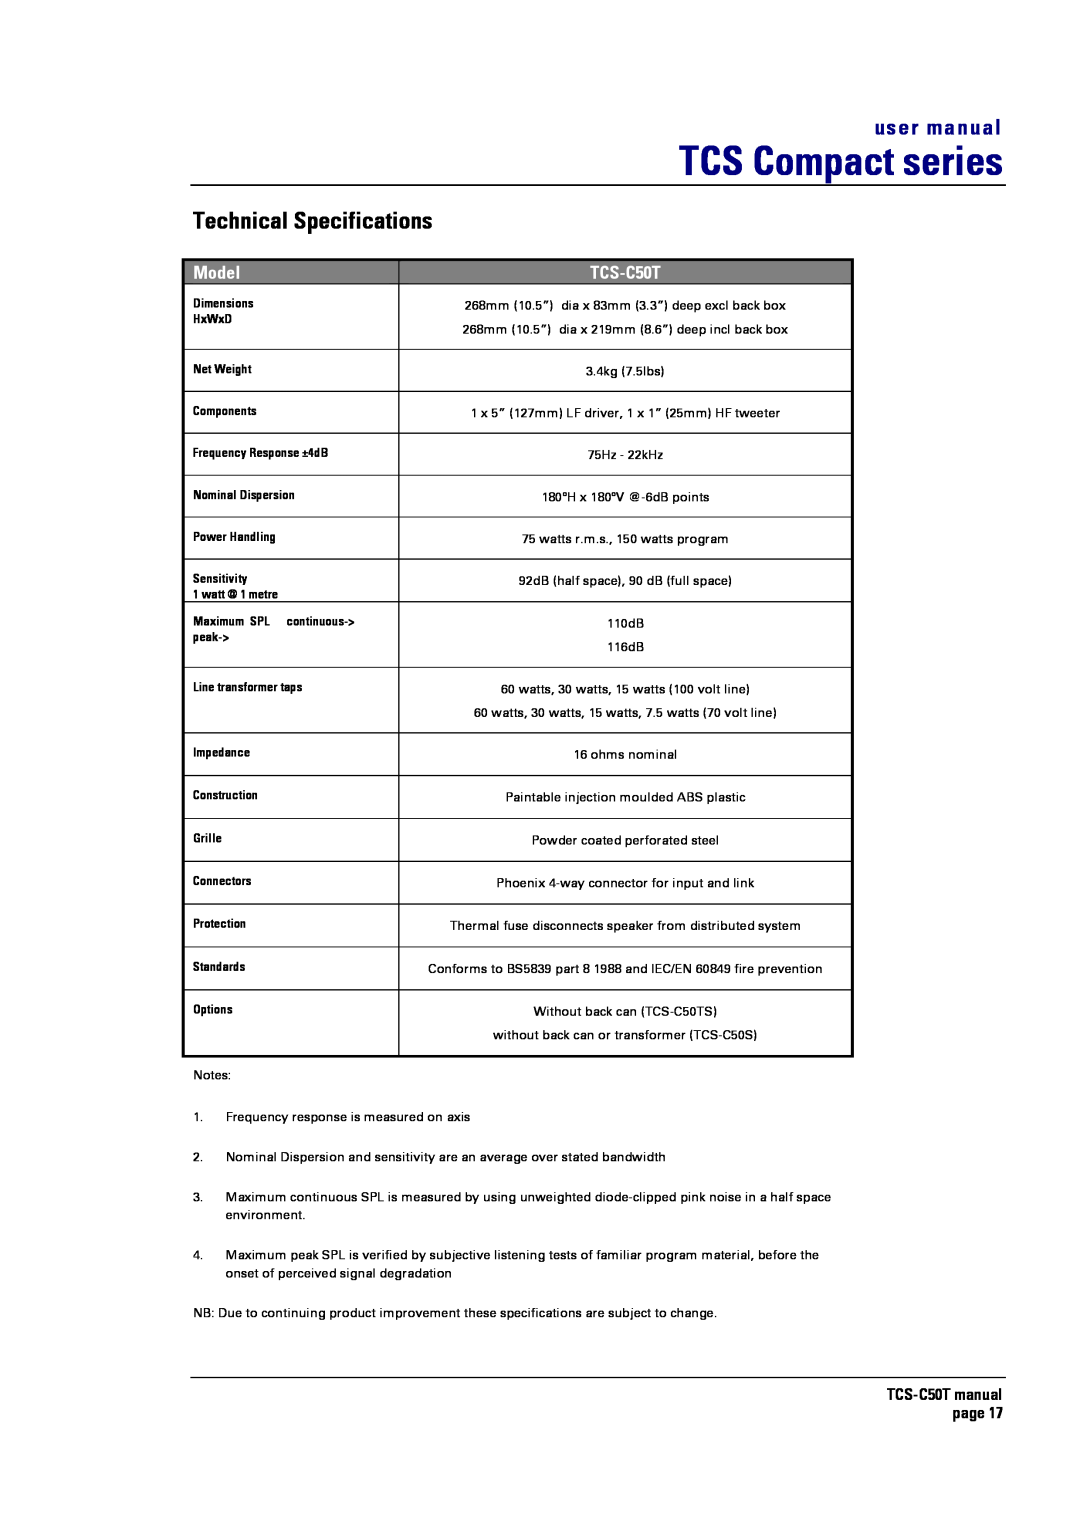 Turbosound user manual Technical Specifications, TCS Compact series, Model, TCS-C50Tmanual page 